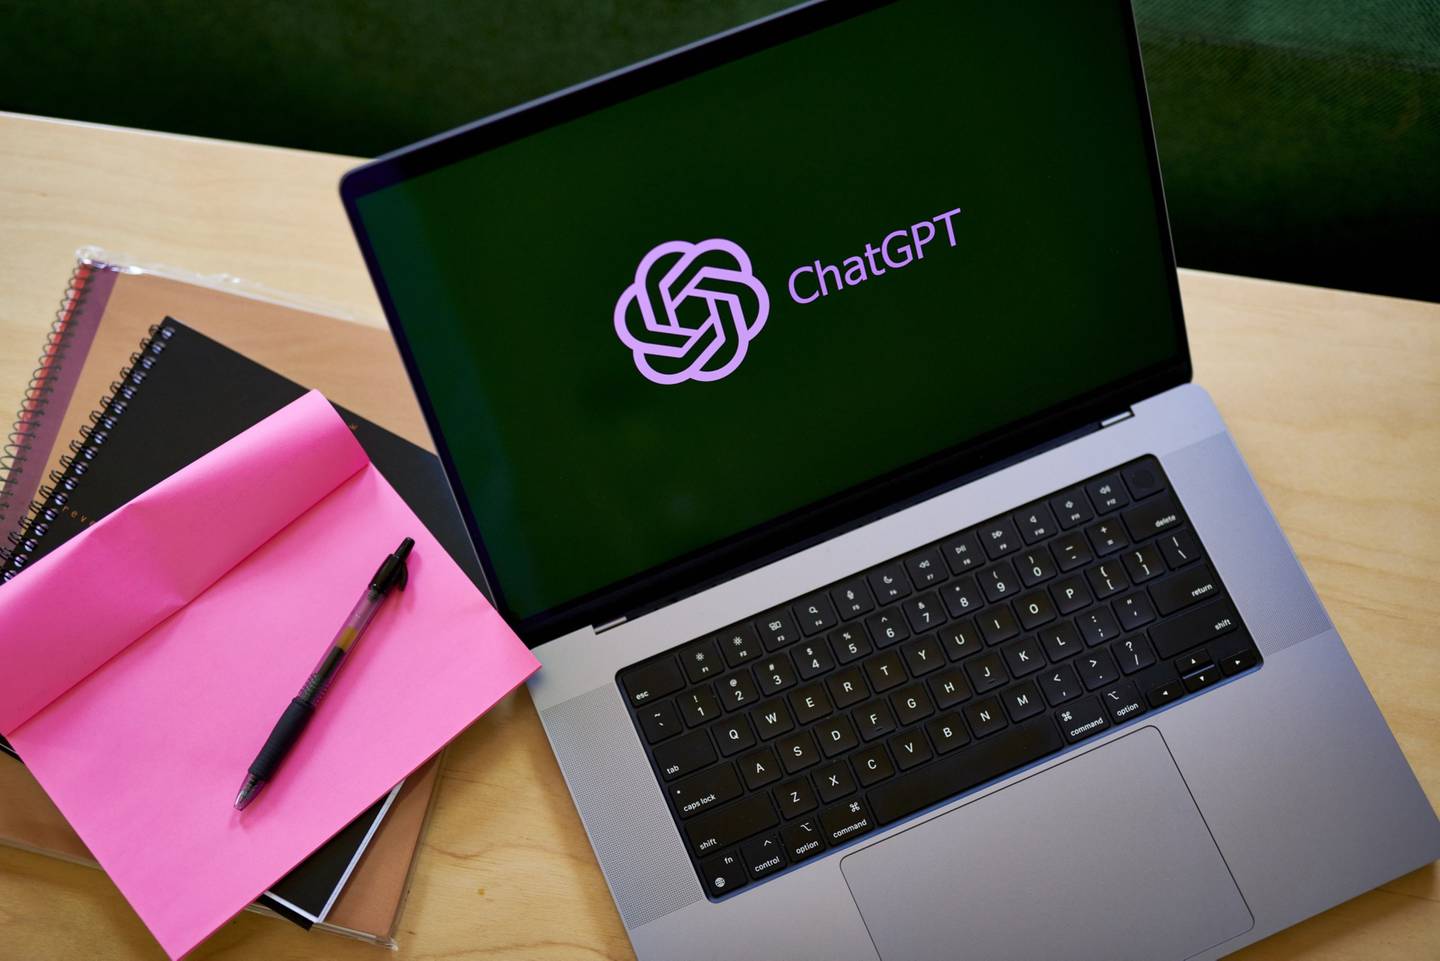 ChatGPT's logo on a laptop in New York, in March 2023.